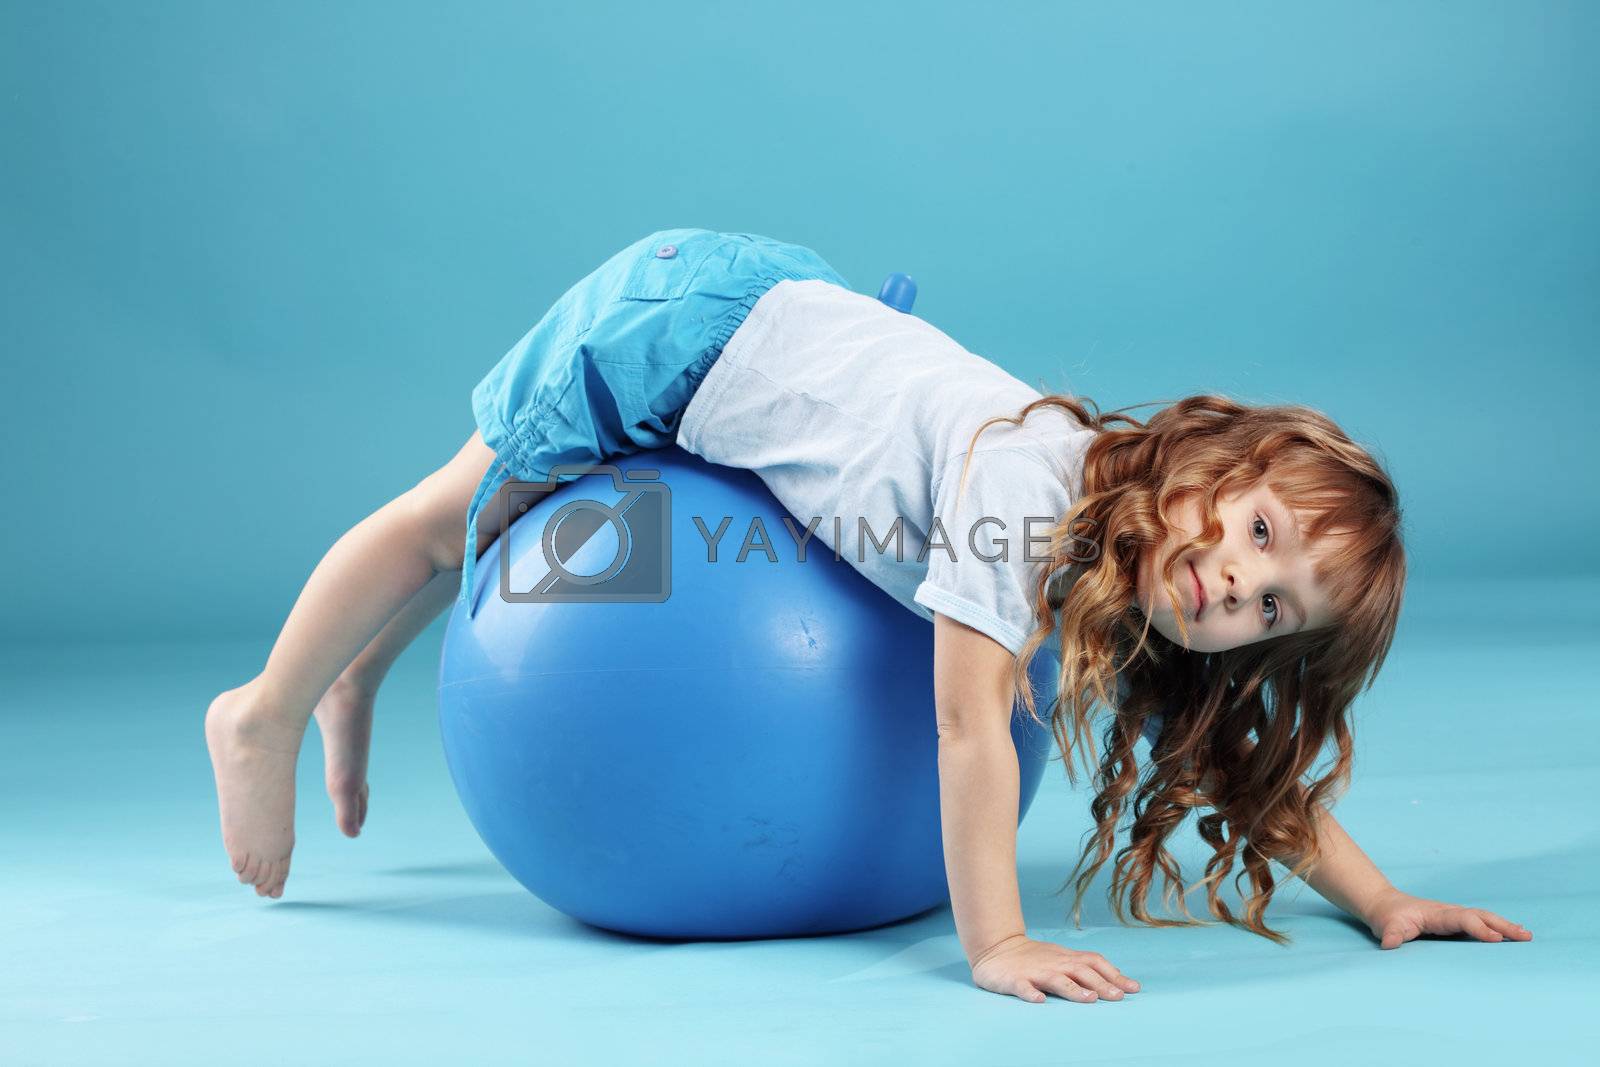 Royalty free image of Child with gymnastic ball by alenkasm